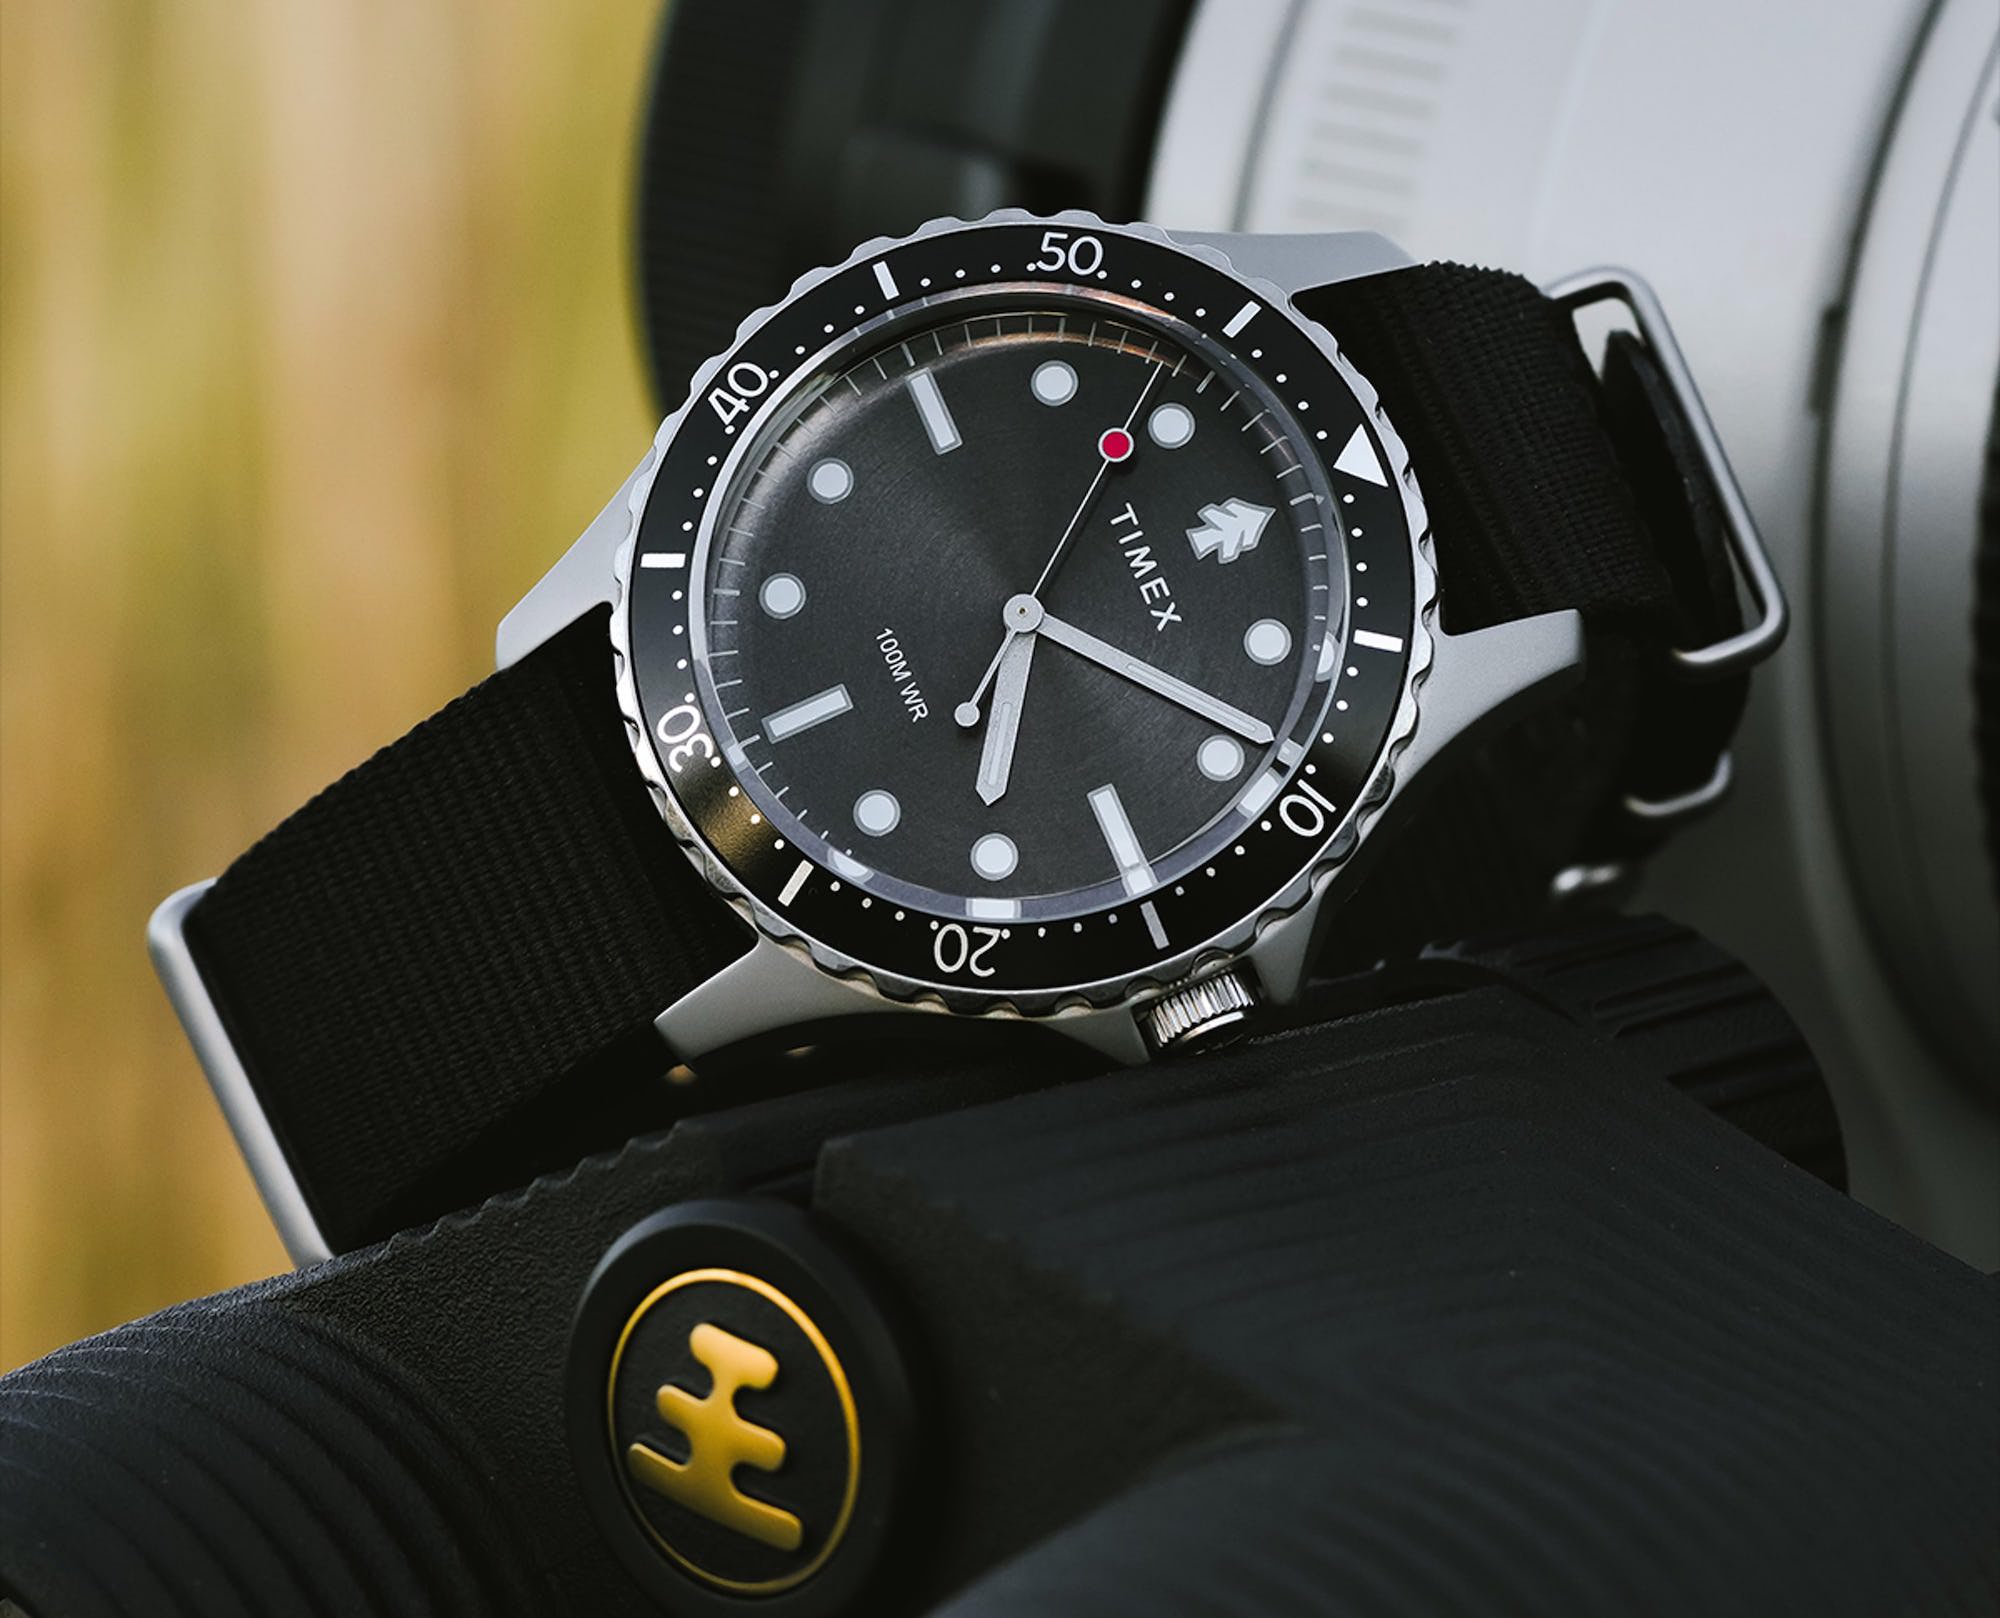 Huckberry X Timex Diver - A Classically-Styled Dive Watch For $118 USD